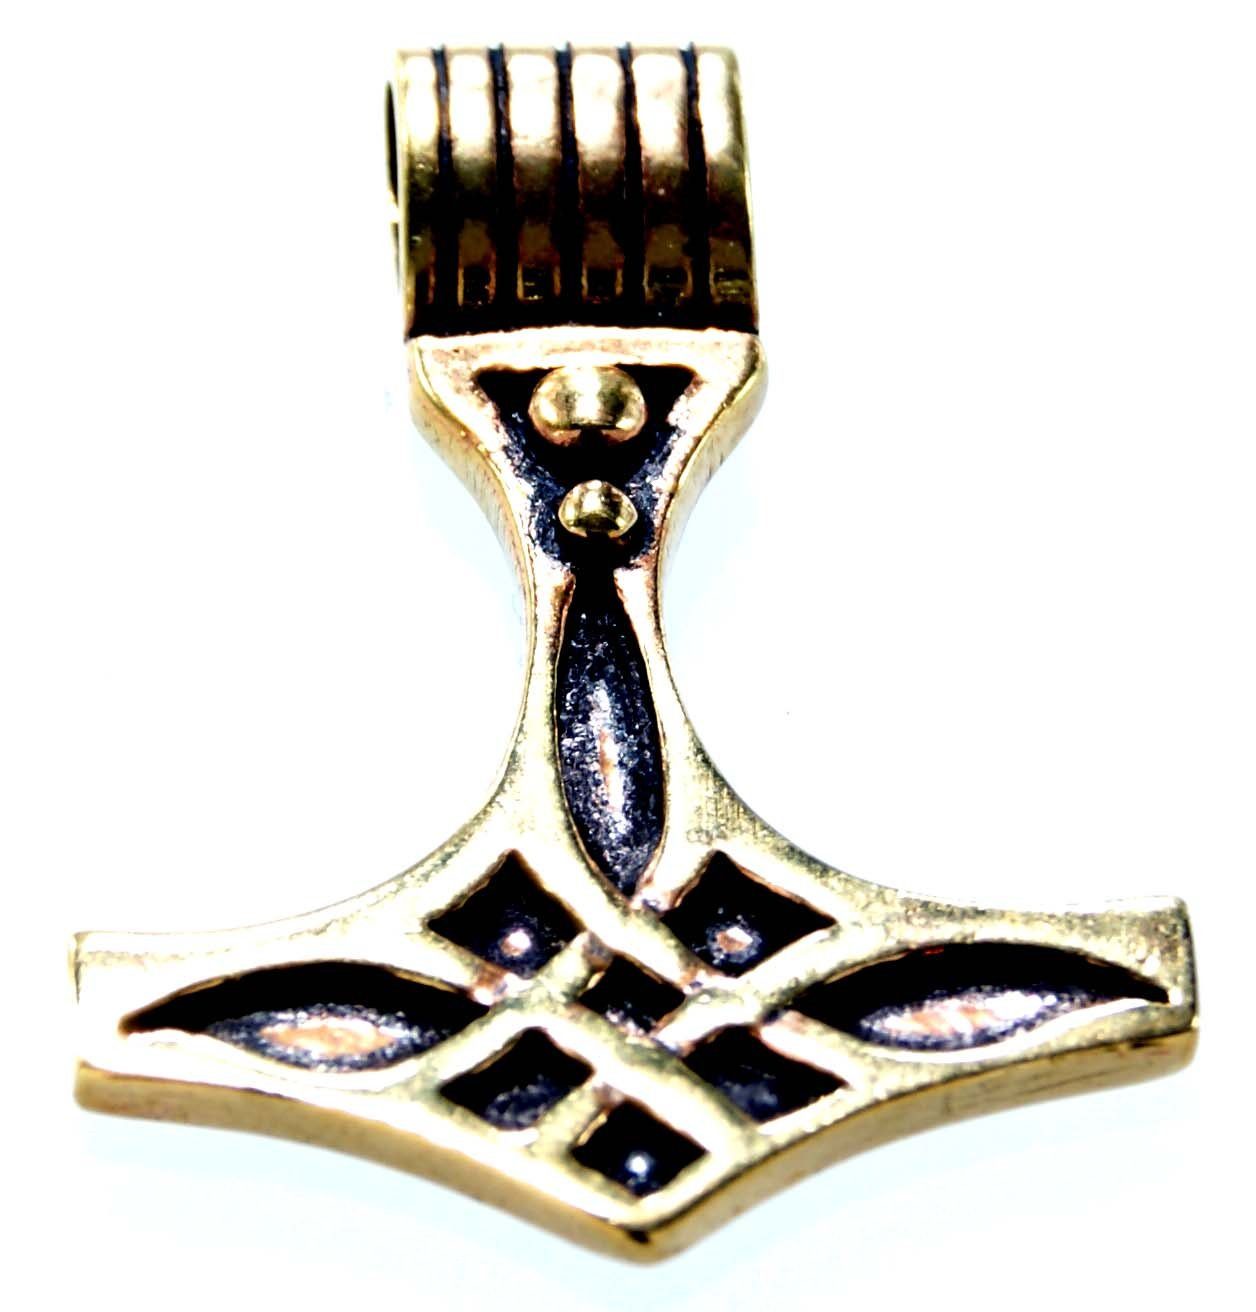 Thor Odin Kettenanhänger Kiss of Leather Bronze Wikinger Thorhammer Thorshammer Thors Hammer